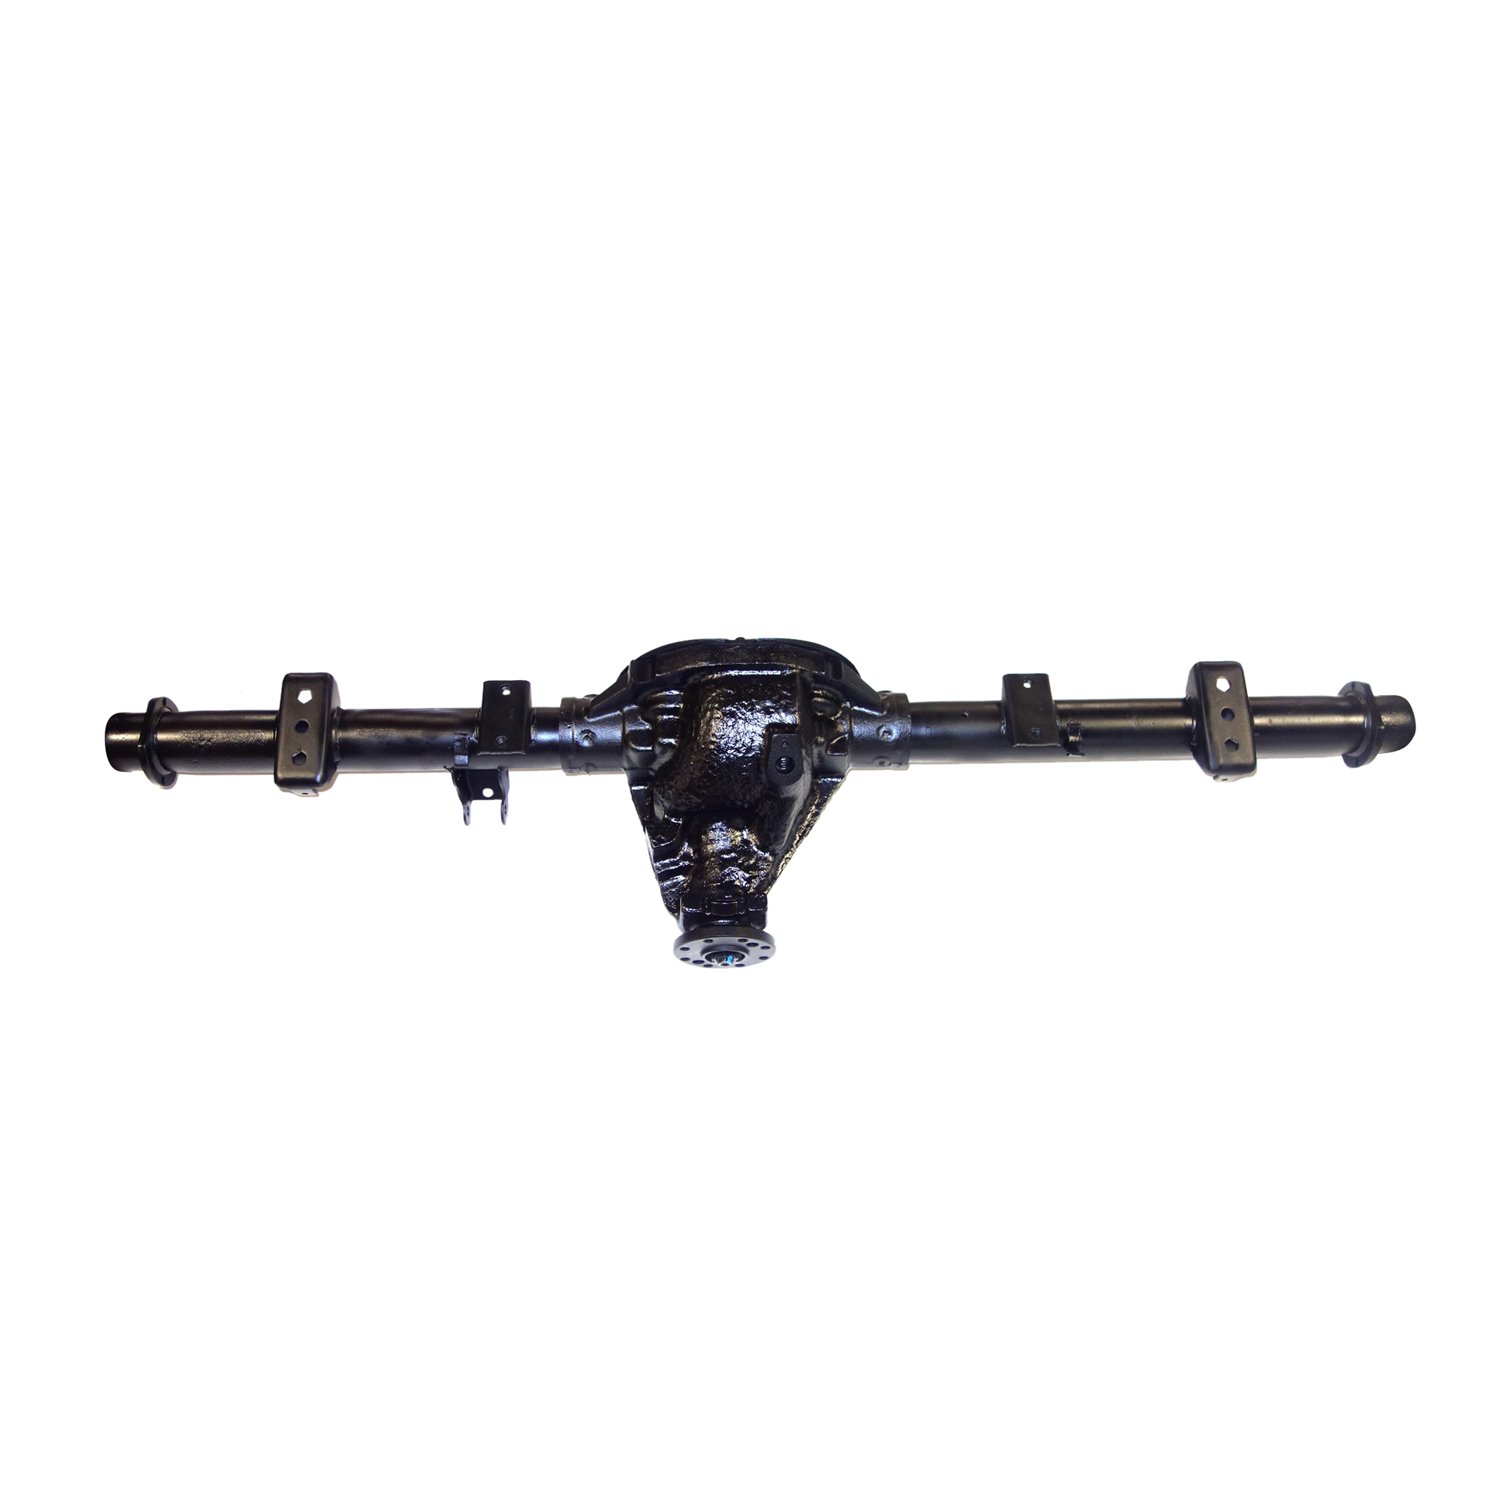 Remanufactured Axle Assy for Chy 8.25" 04-05 Durango 3.92 , 4x4 w/o Traction Control